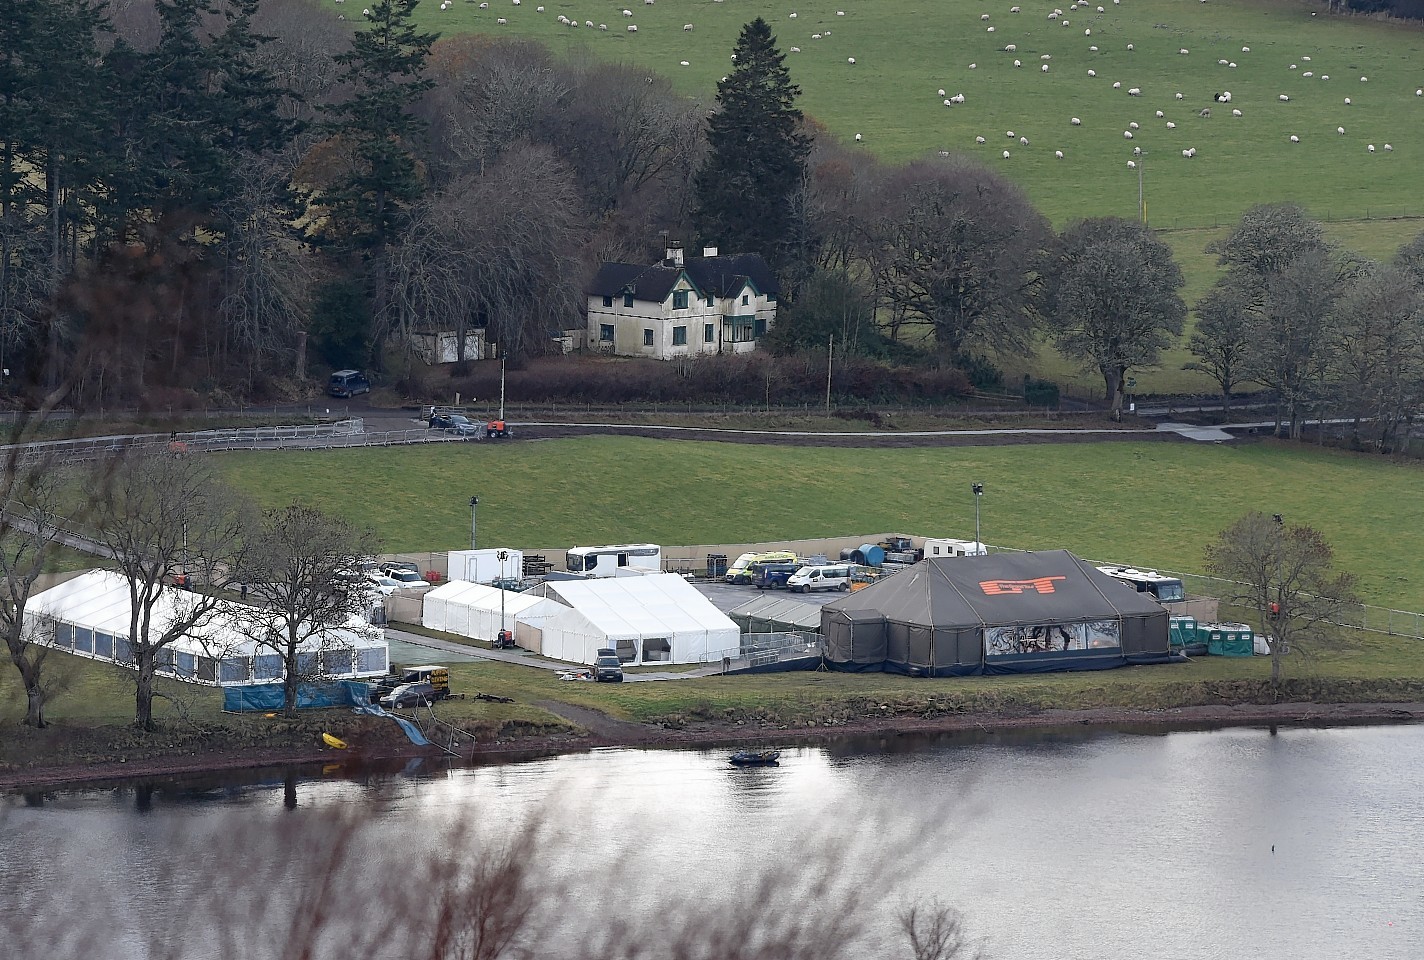 The Grand Tour tent takes shape on the shores of Loch Ness